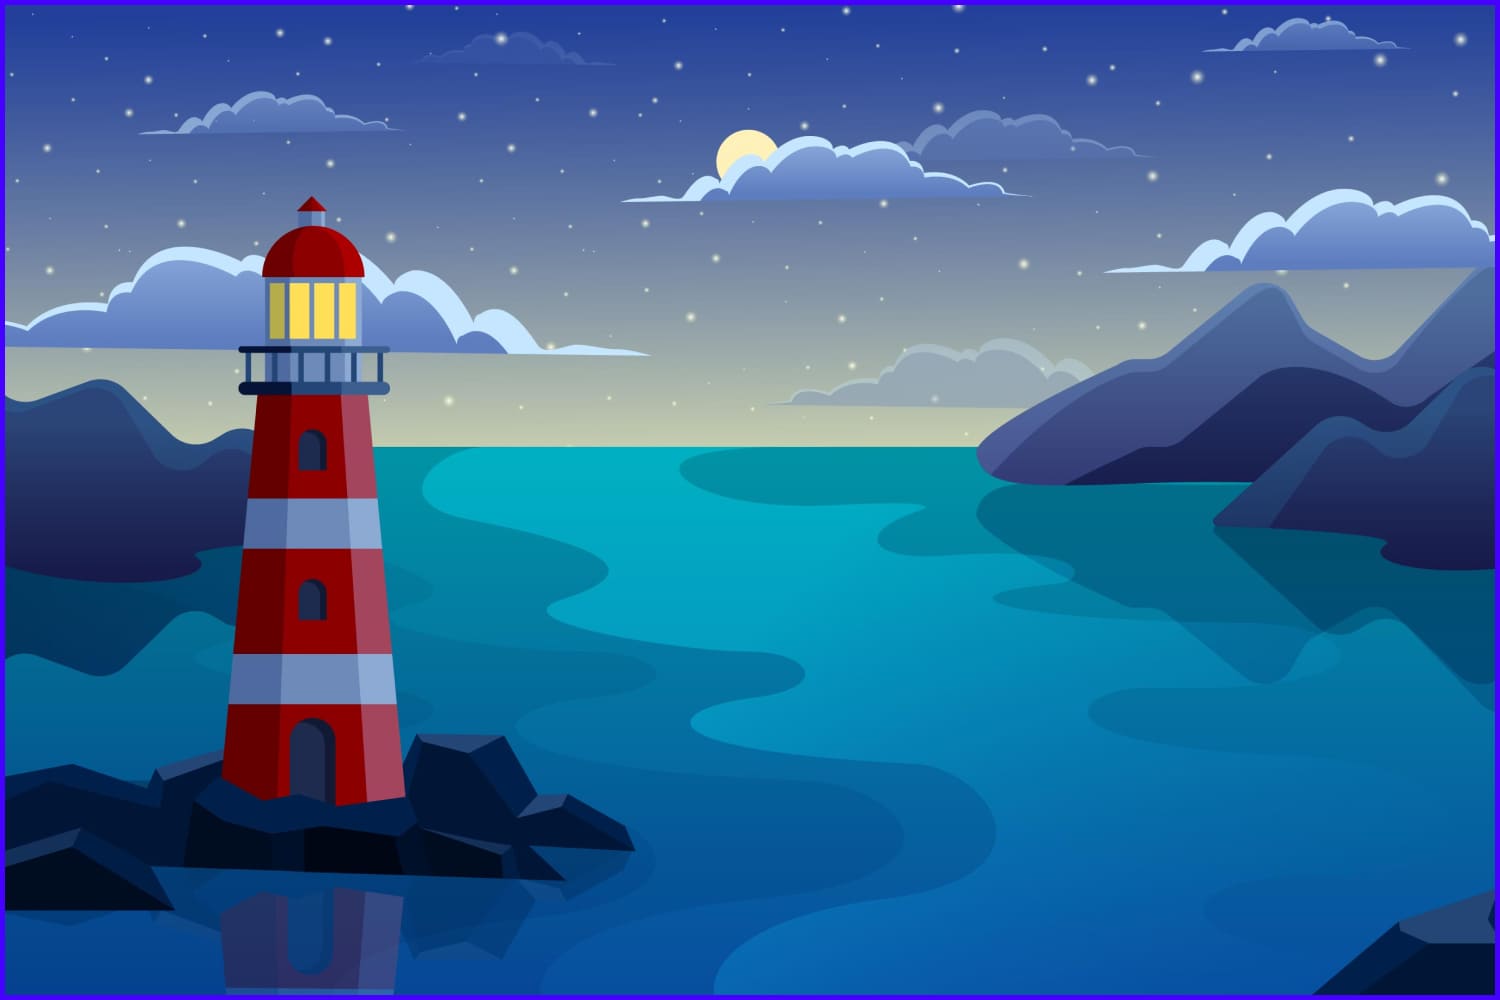 Drawing of a lighthouse against the background of the starry sky and the moon.